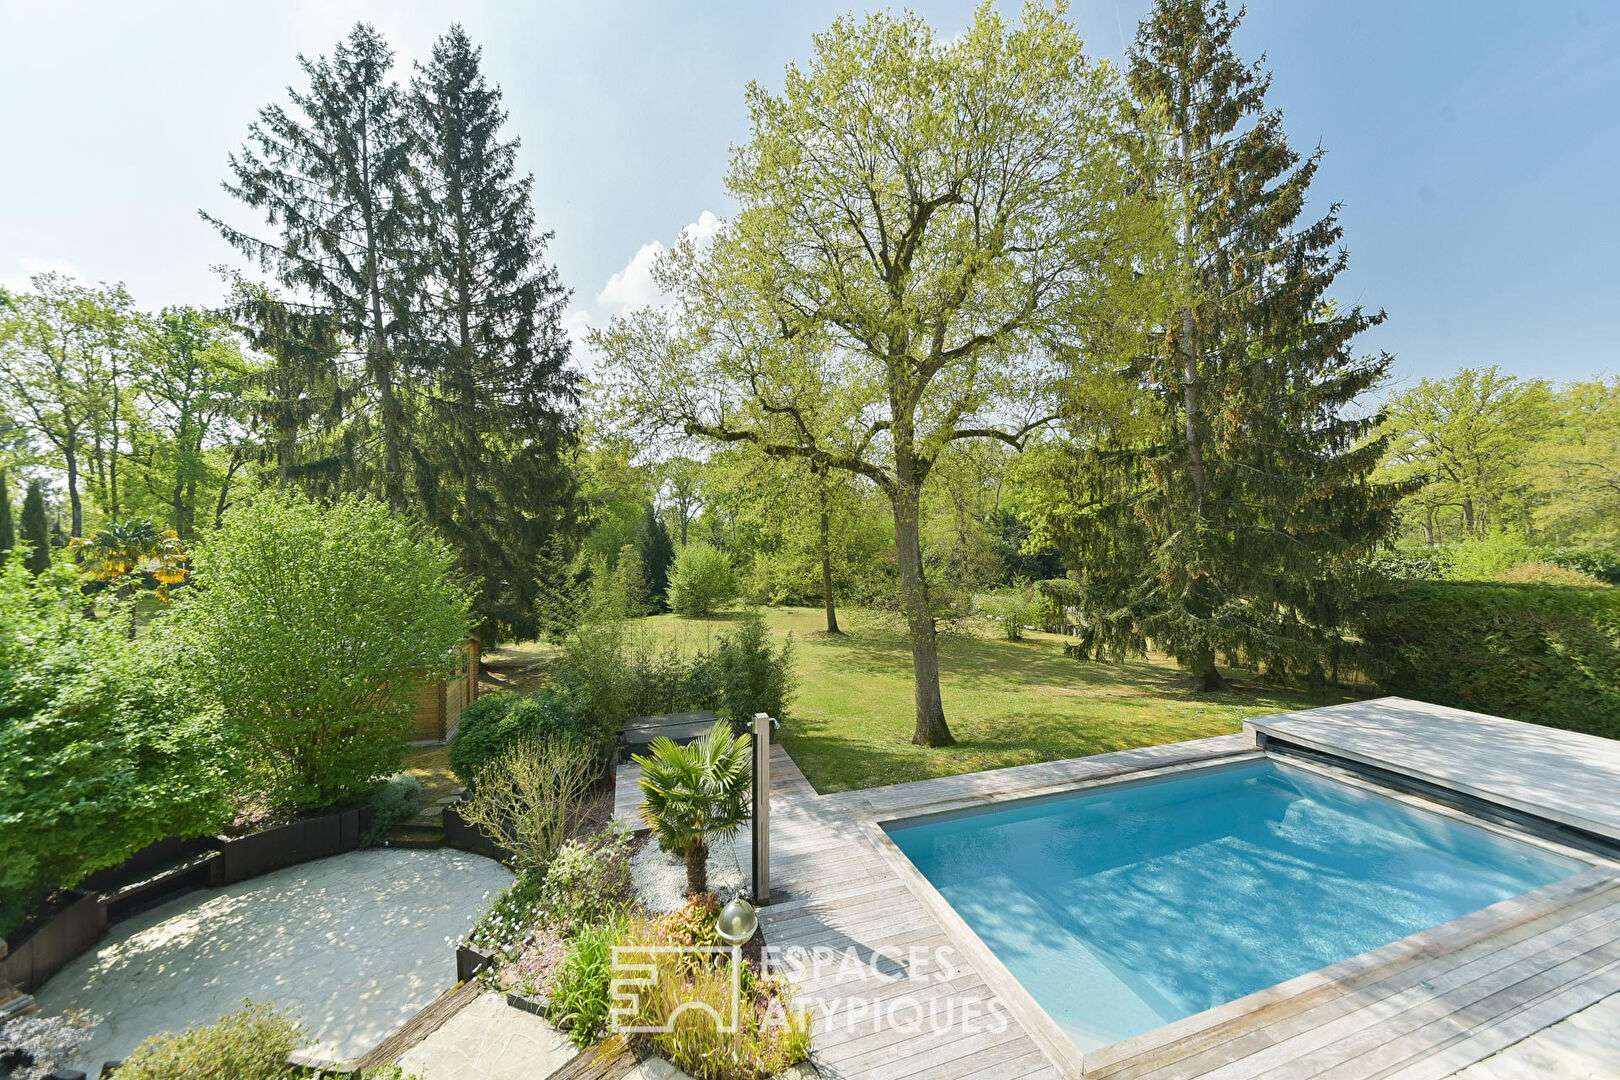 L’EPATANTE – Family property with swimming pool in the heart of the Lys